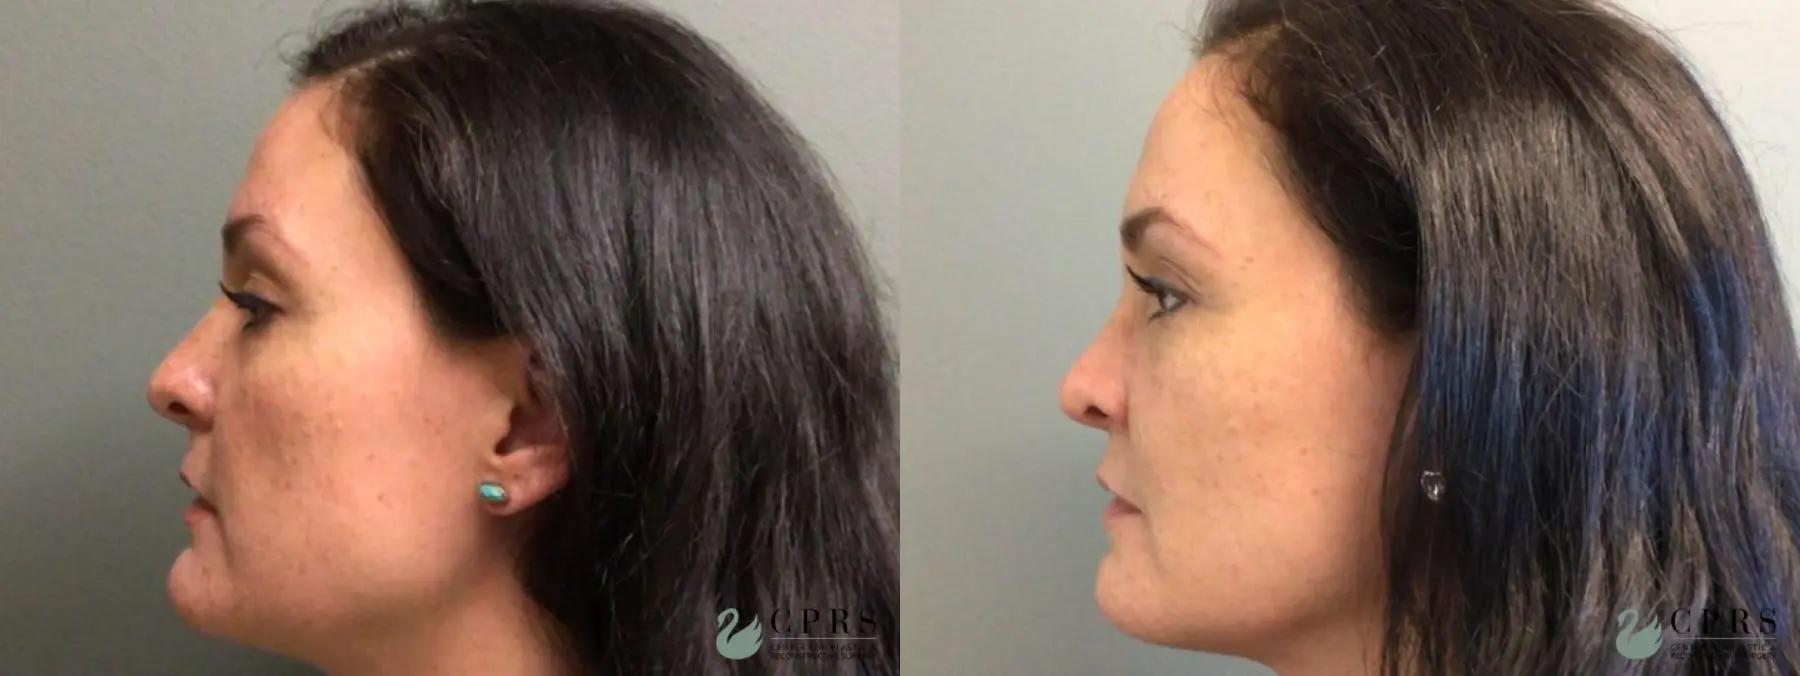 Chin Reduction: Patient 1 - Before and After 1